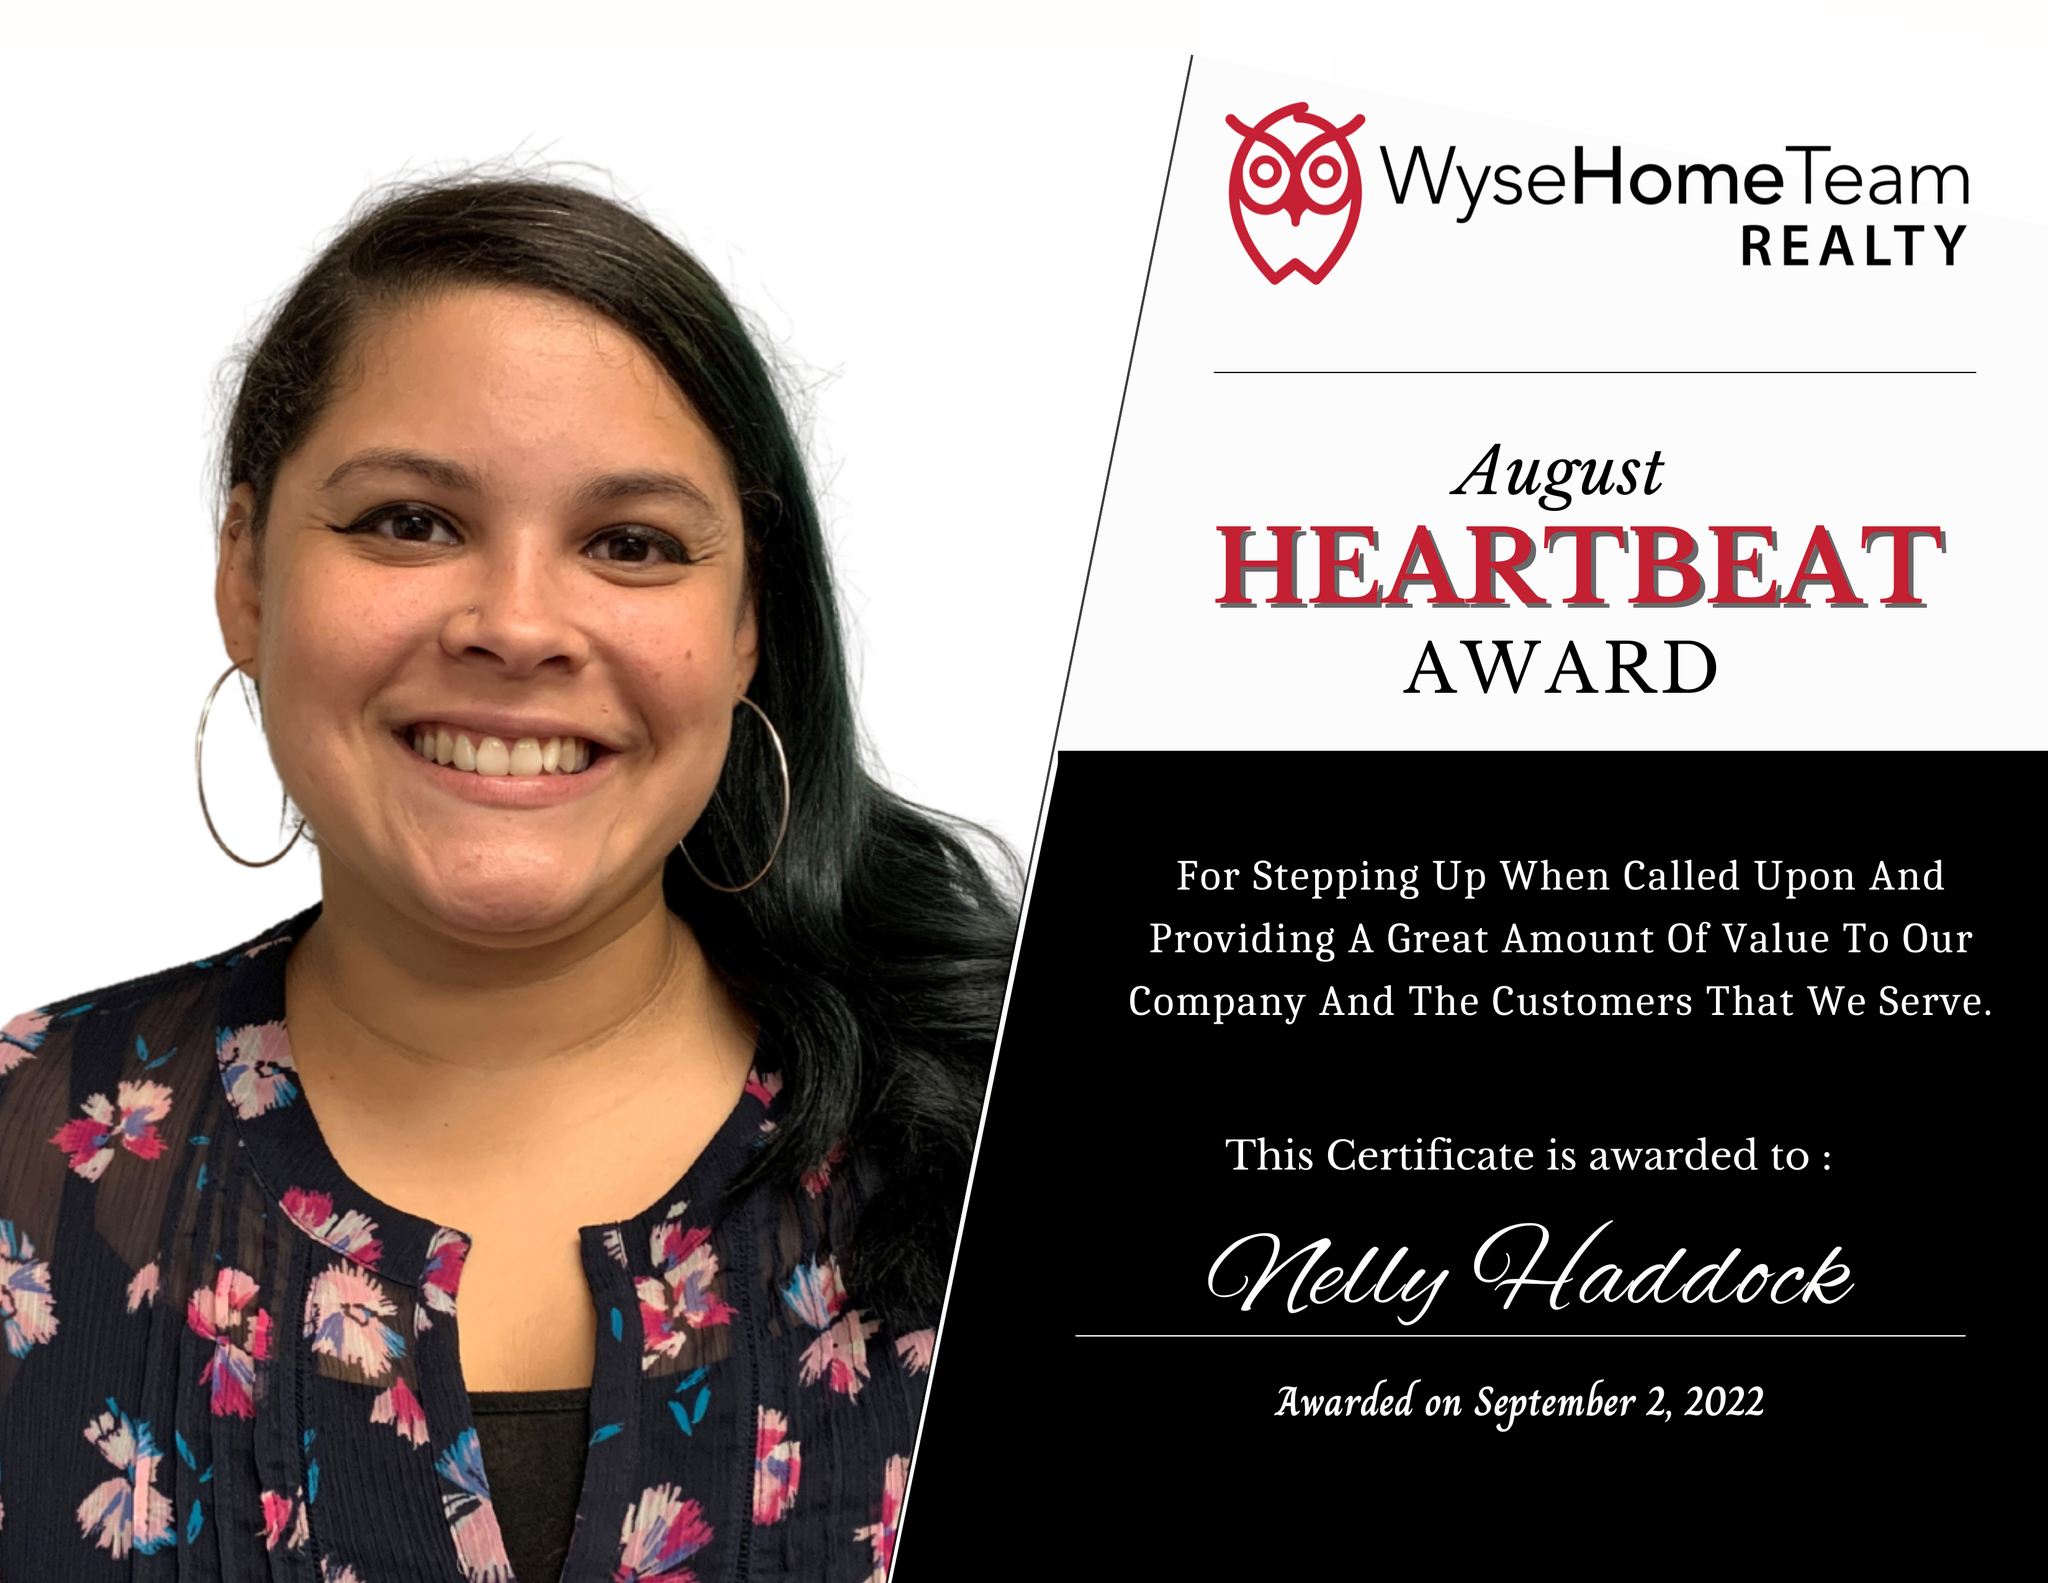 Team voted winner of the August 2022 Heartbeat Award